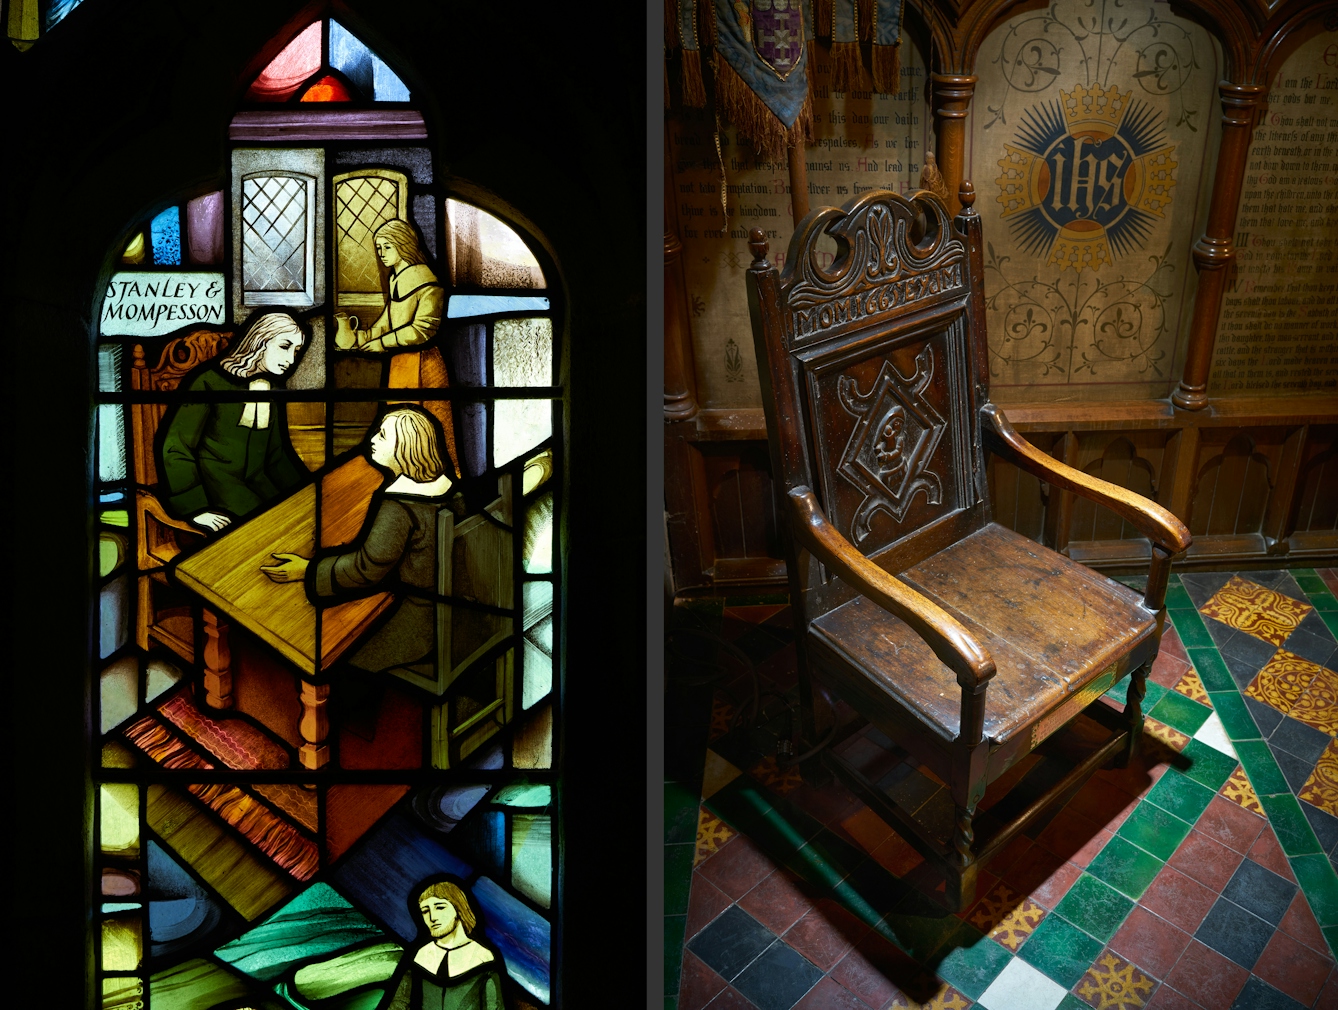 Photographic diptych showing on the left a modern stained glass windows in St Lawrence's Church in Eyam depicting scenes from the plague of 1665/6. On the right is a photograph of an engraved wooden chair believed to have been used by Mompesson during his crucial meetings with the villagers of Eyam.